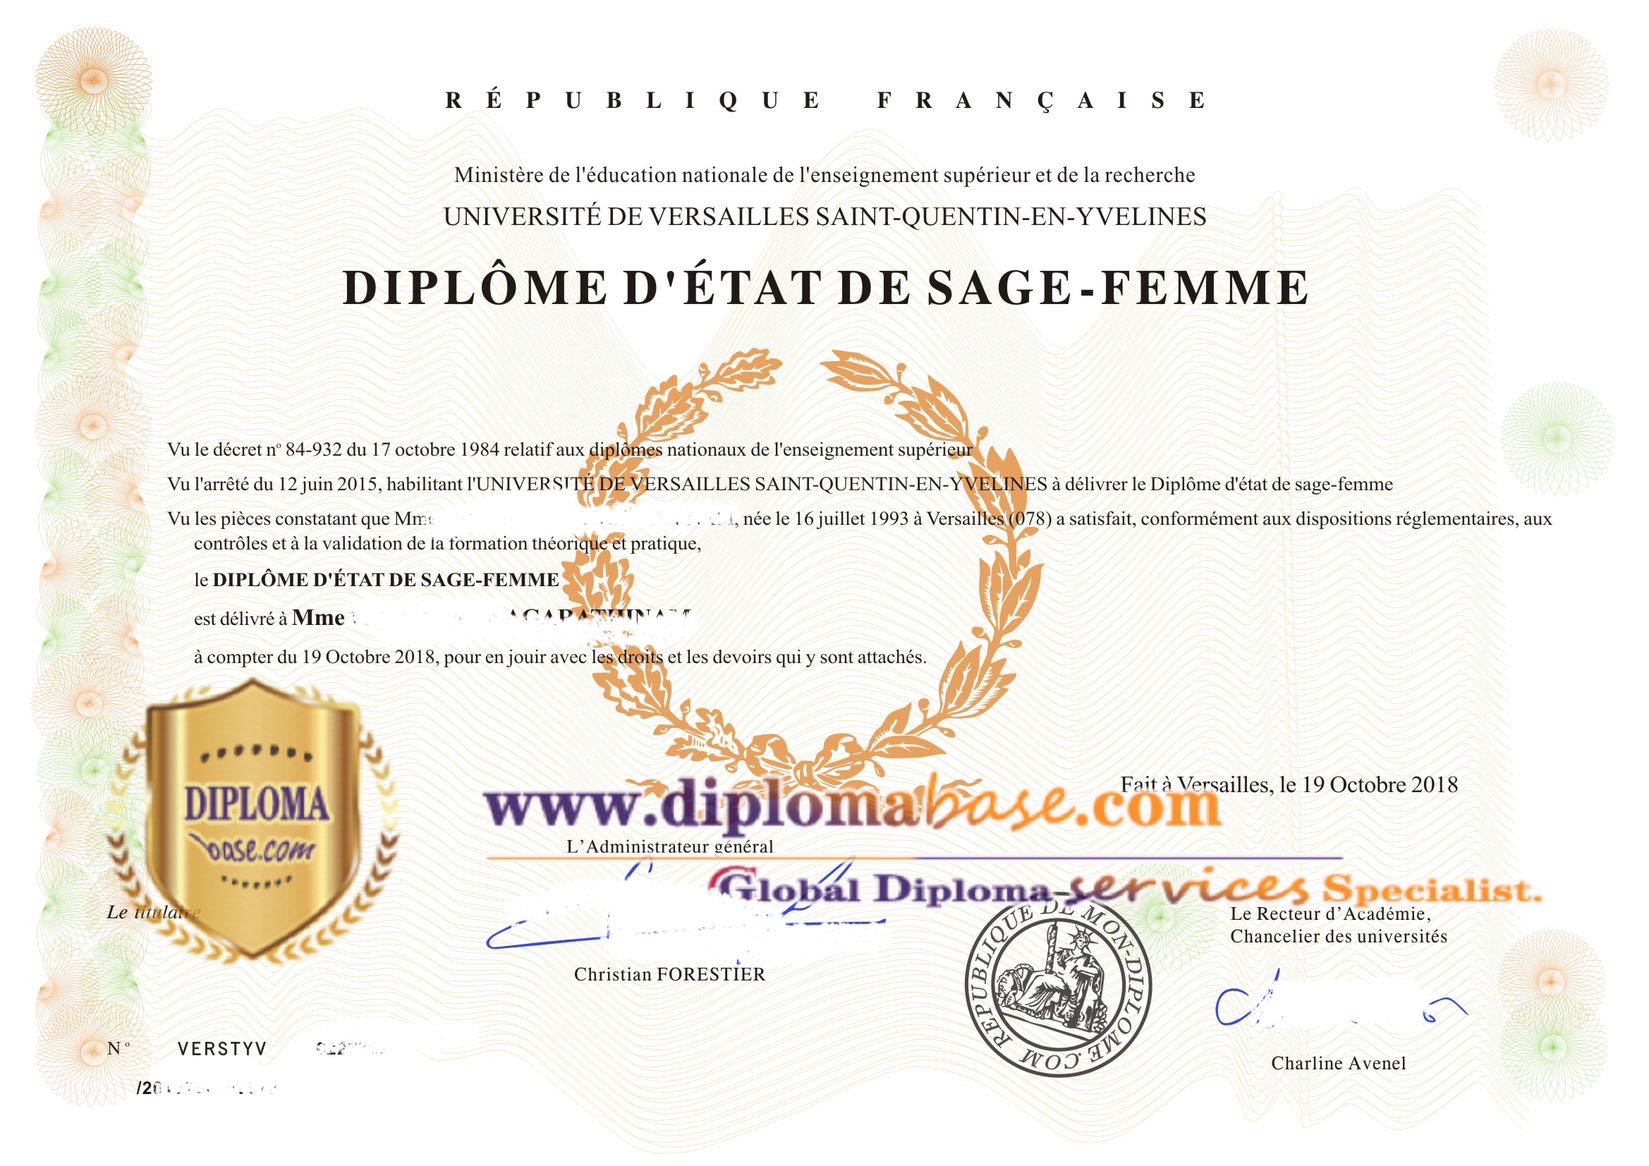 Quickly buy a diploma from the University of Versailles in France